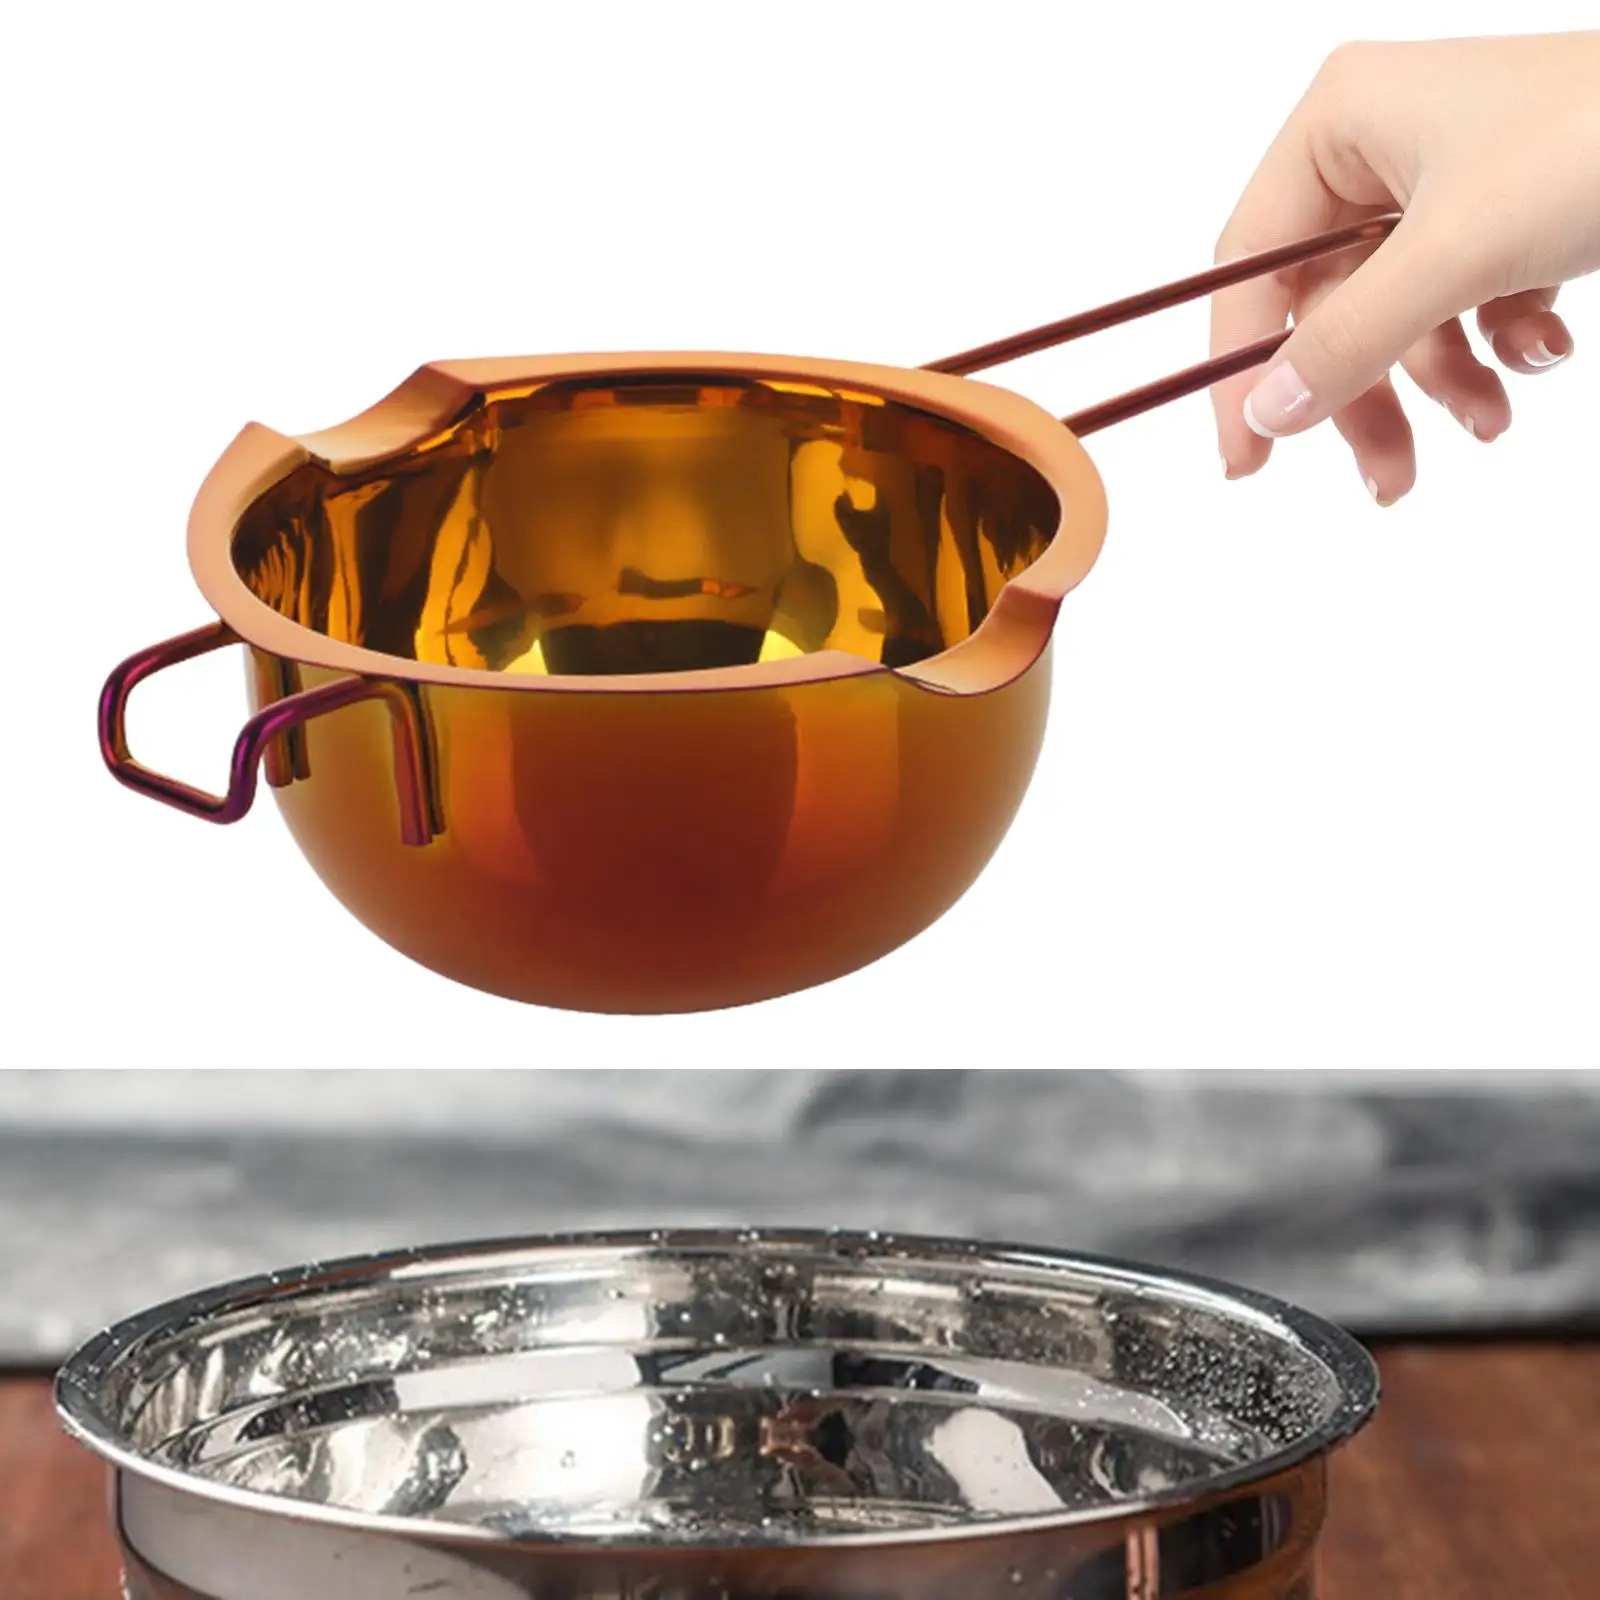 Stainless Steel Double Metls Pot 400 Ml for Melting Chocolate Baking Tool with